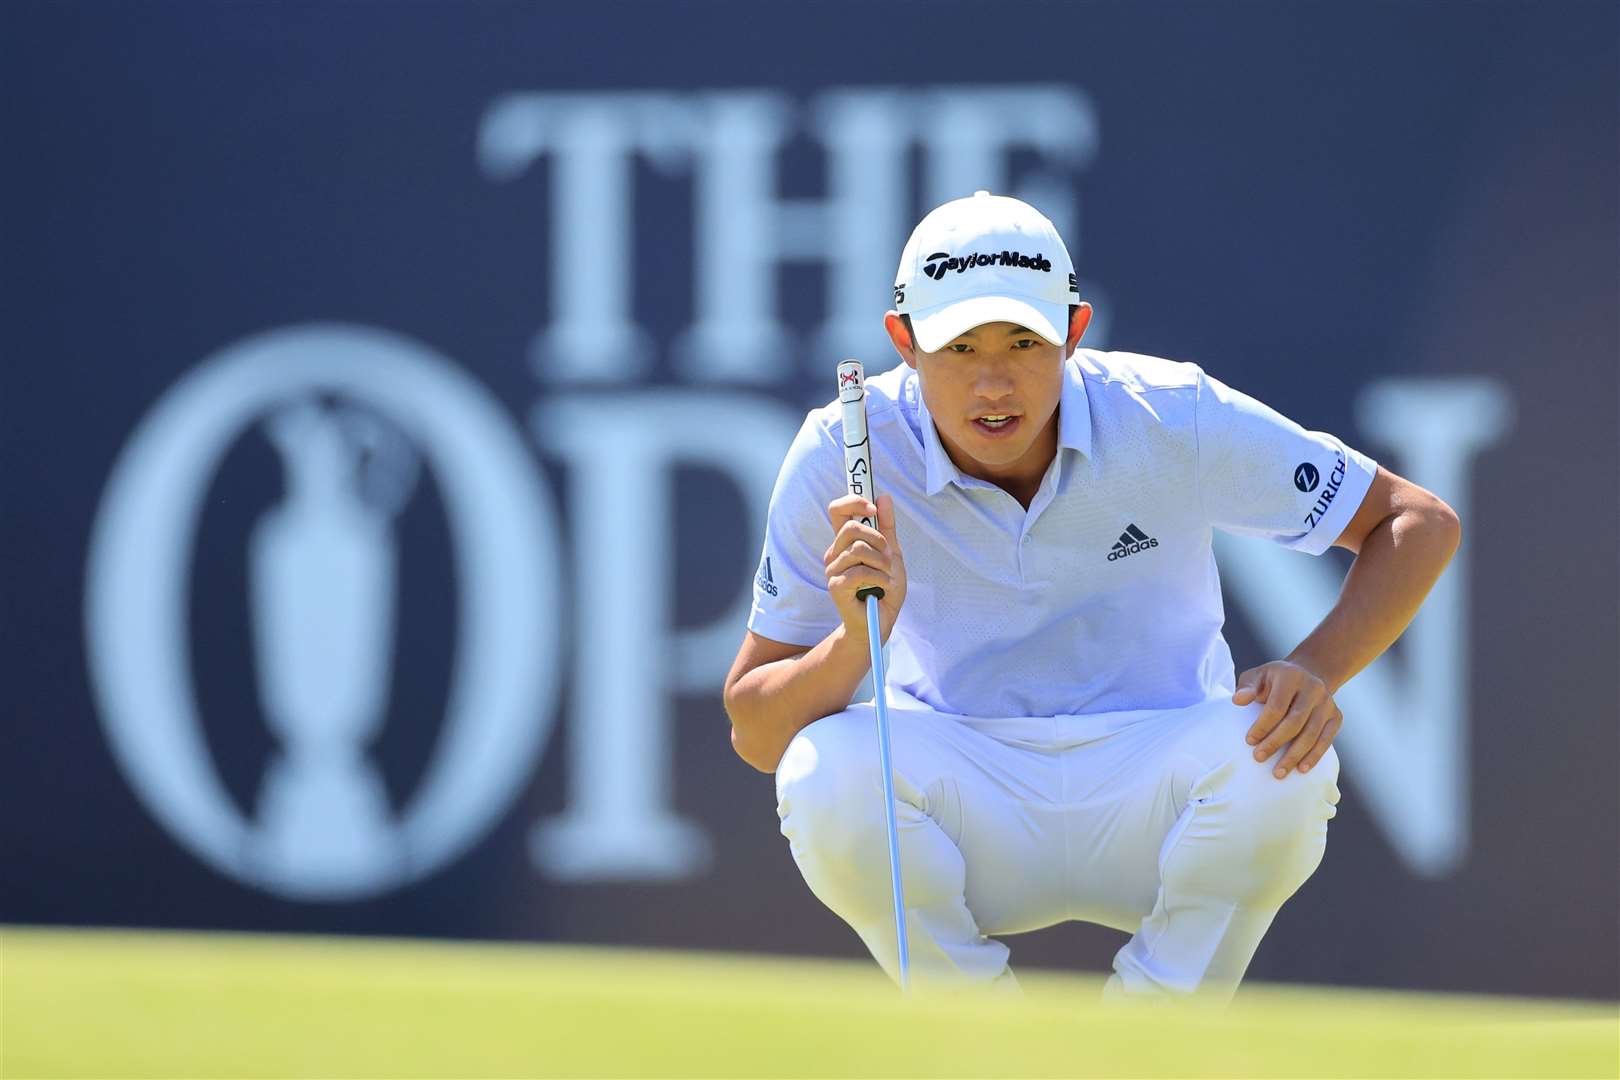 Collin Morikawa lines up a putt on the 18th during his round of 64 on Friday. Picture: The R&A